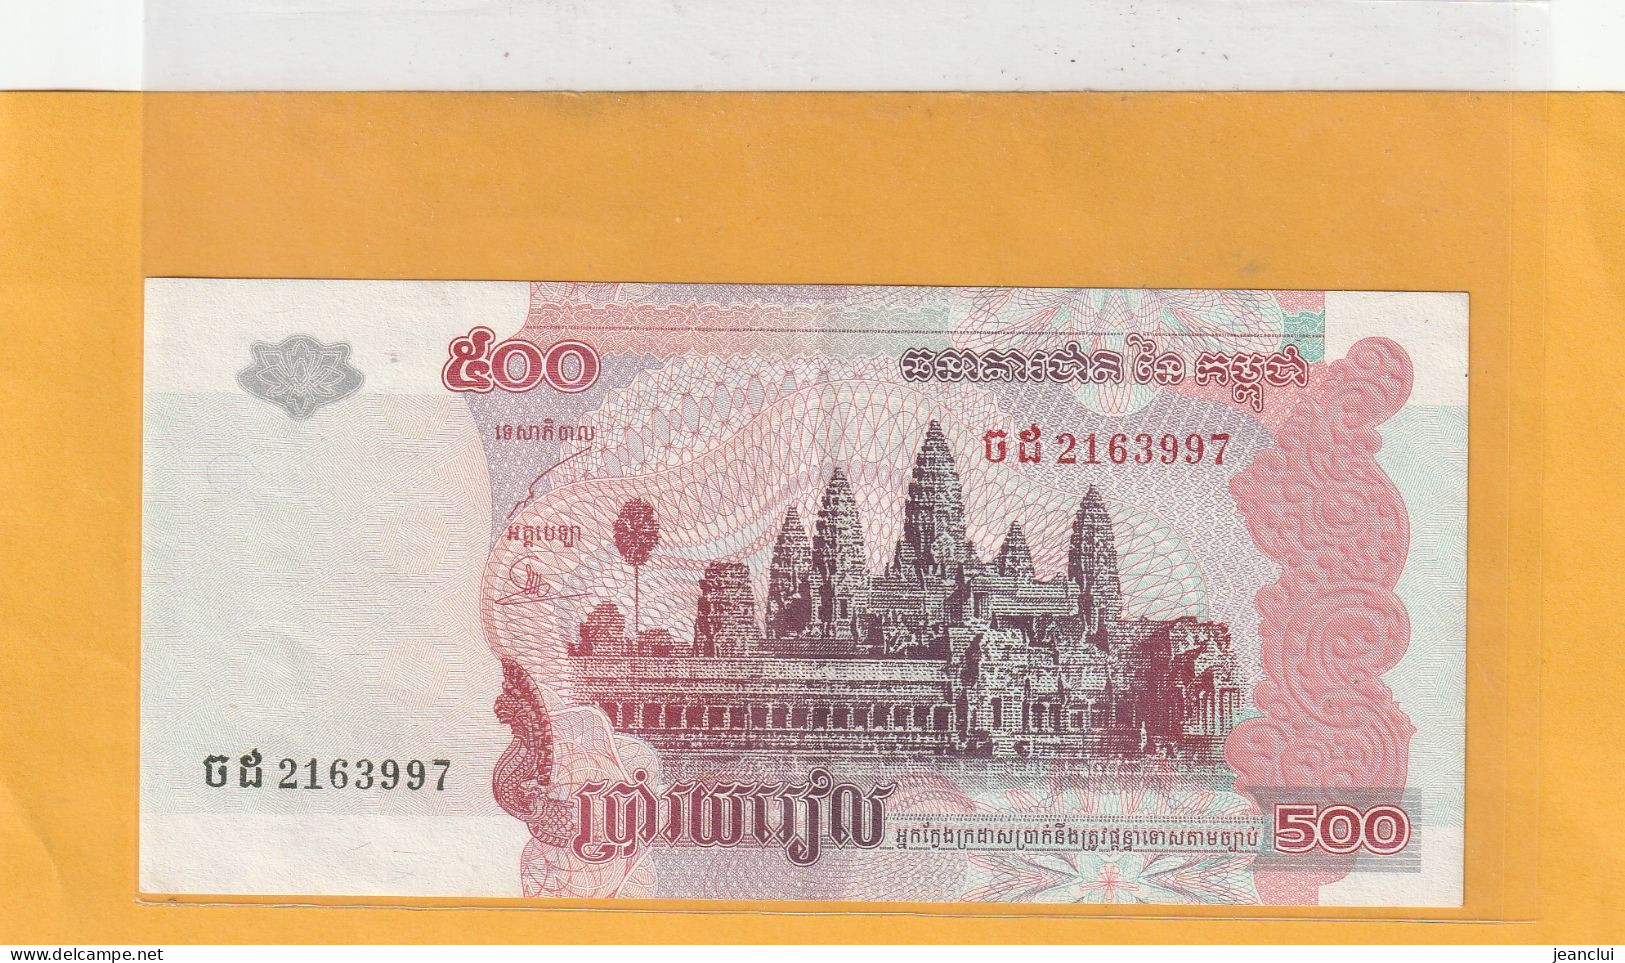 NATIONAL BANK OF CAMBODIA  .  500 RIELS  .  2004  . N°  2163997  .  ETAT LUXE  .  2 SCANNES - Cambodge